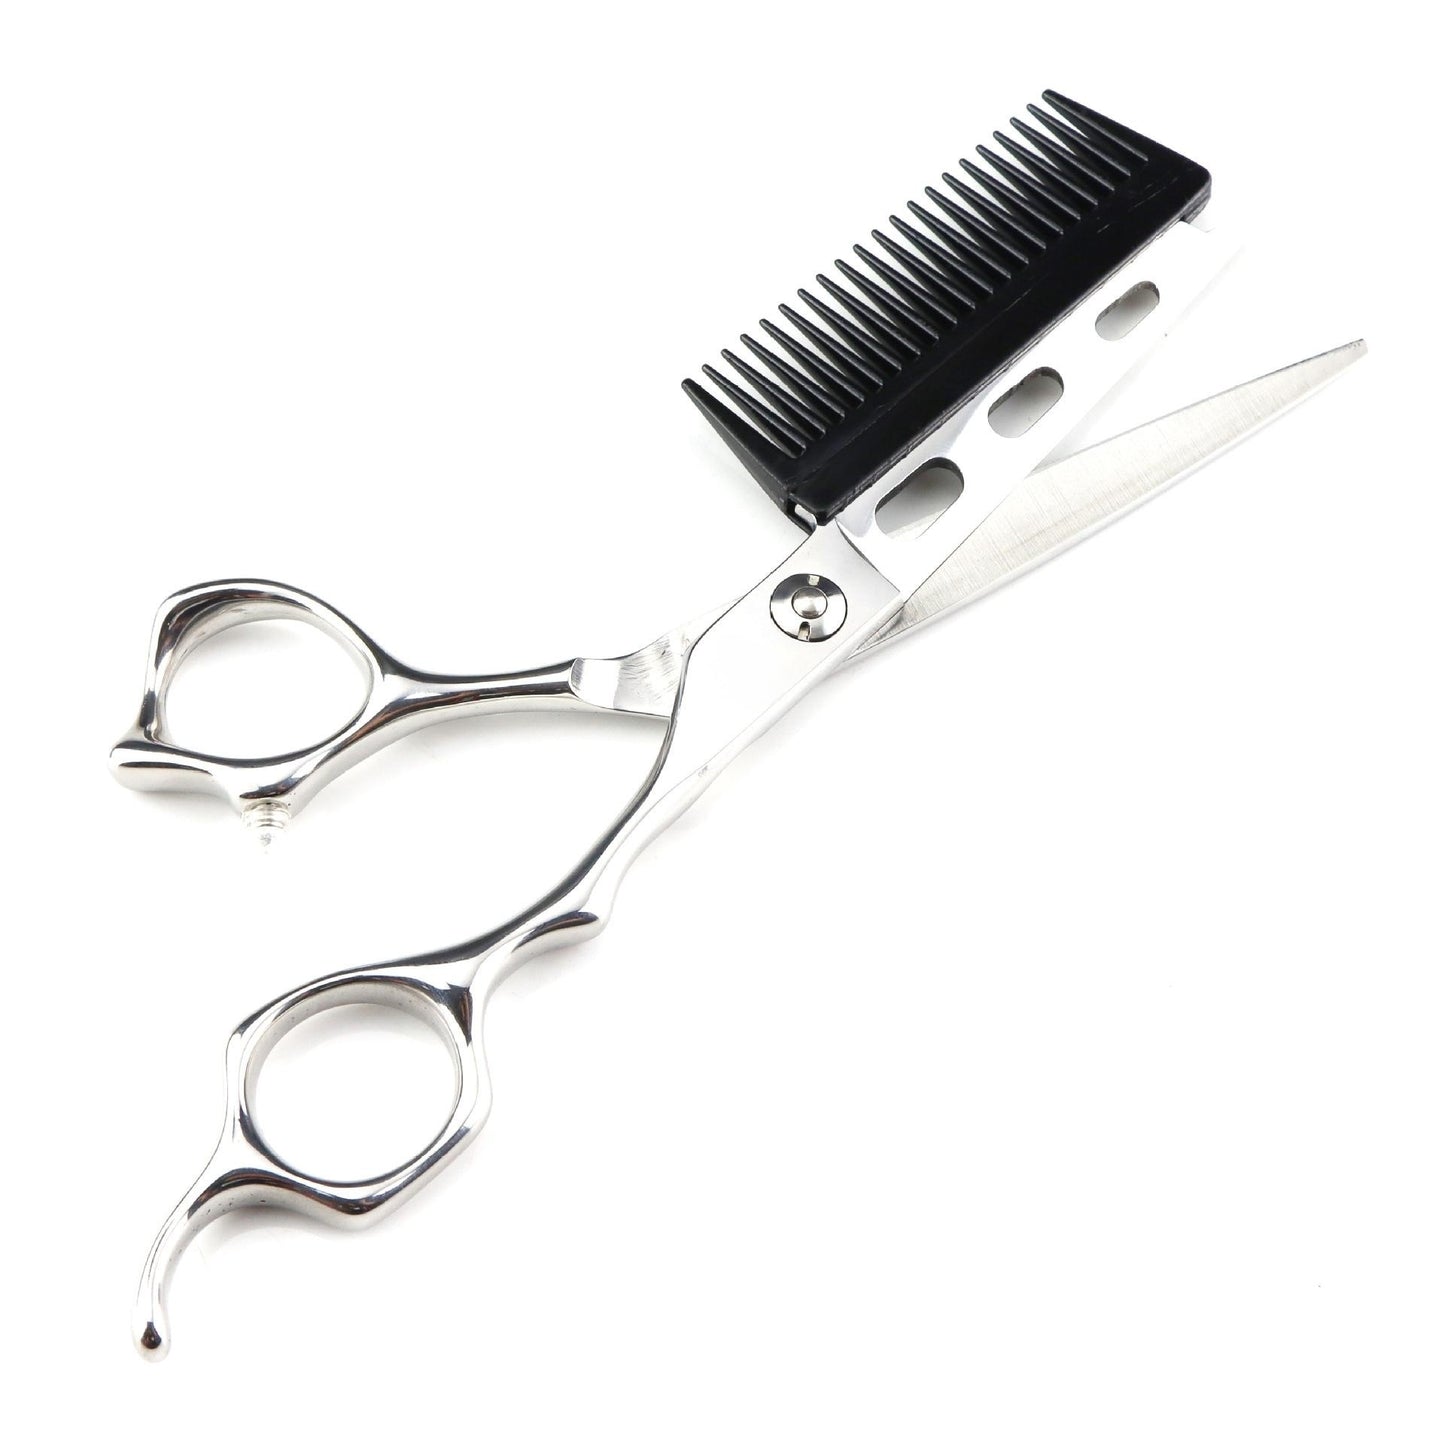 Vertical Cut Scissors 6 Inch High Hardness Japanese Steel 440c Scissors With Built-In Comb